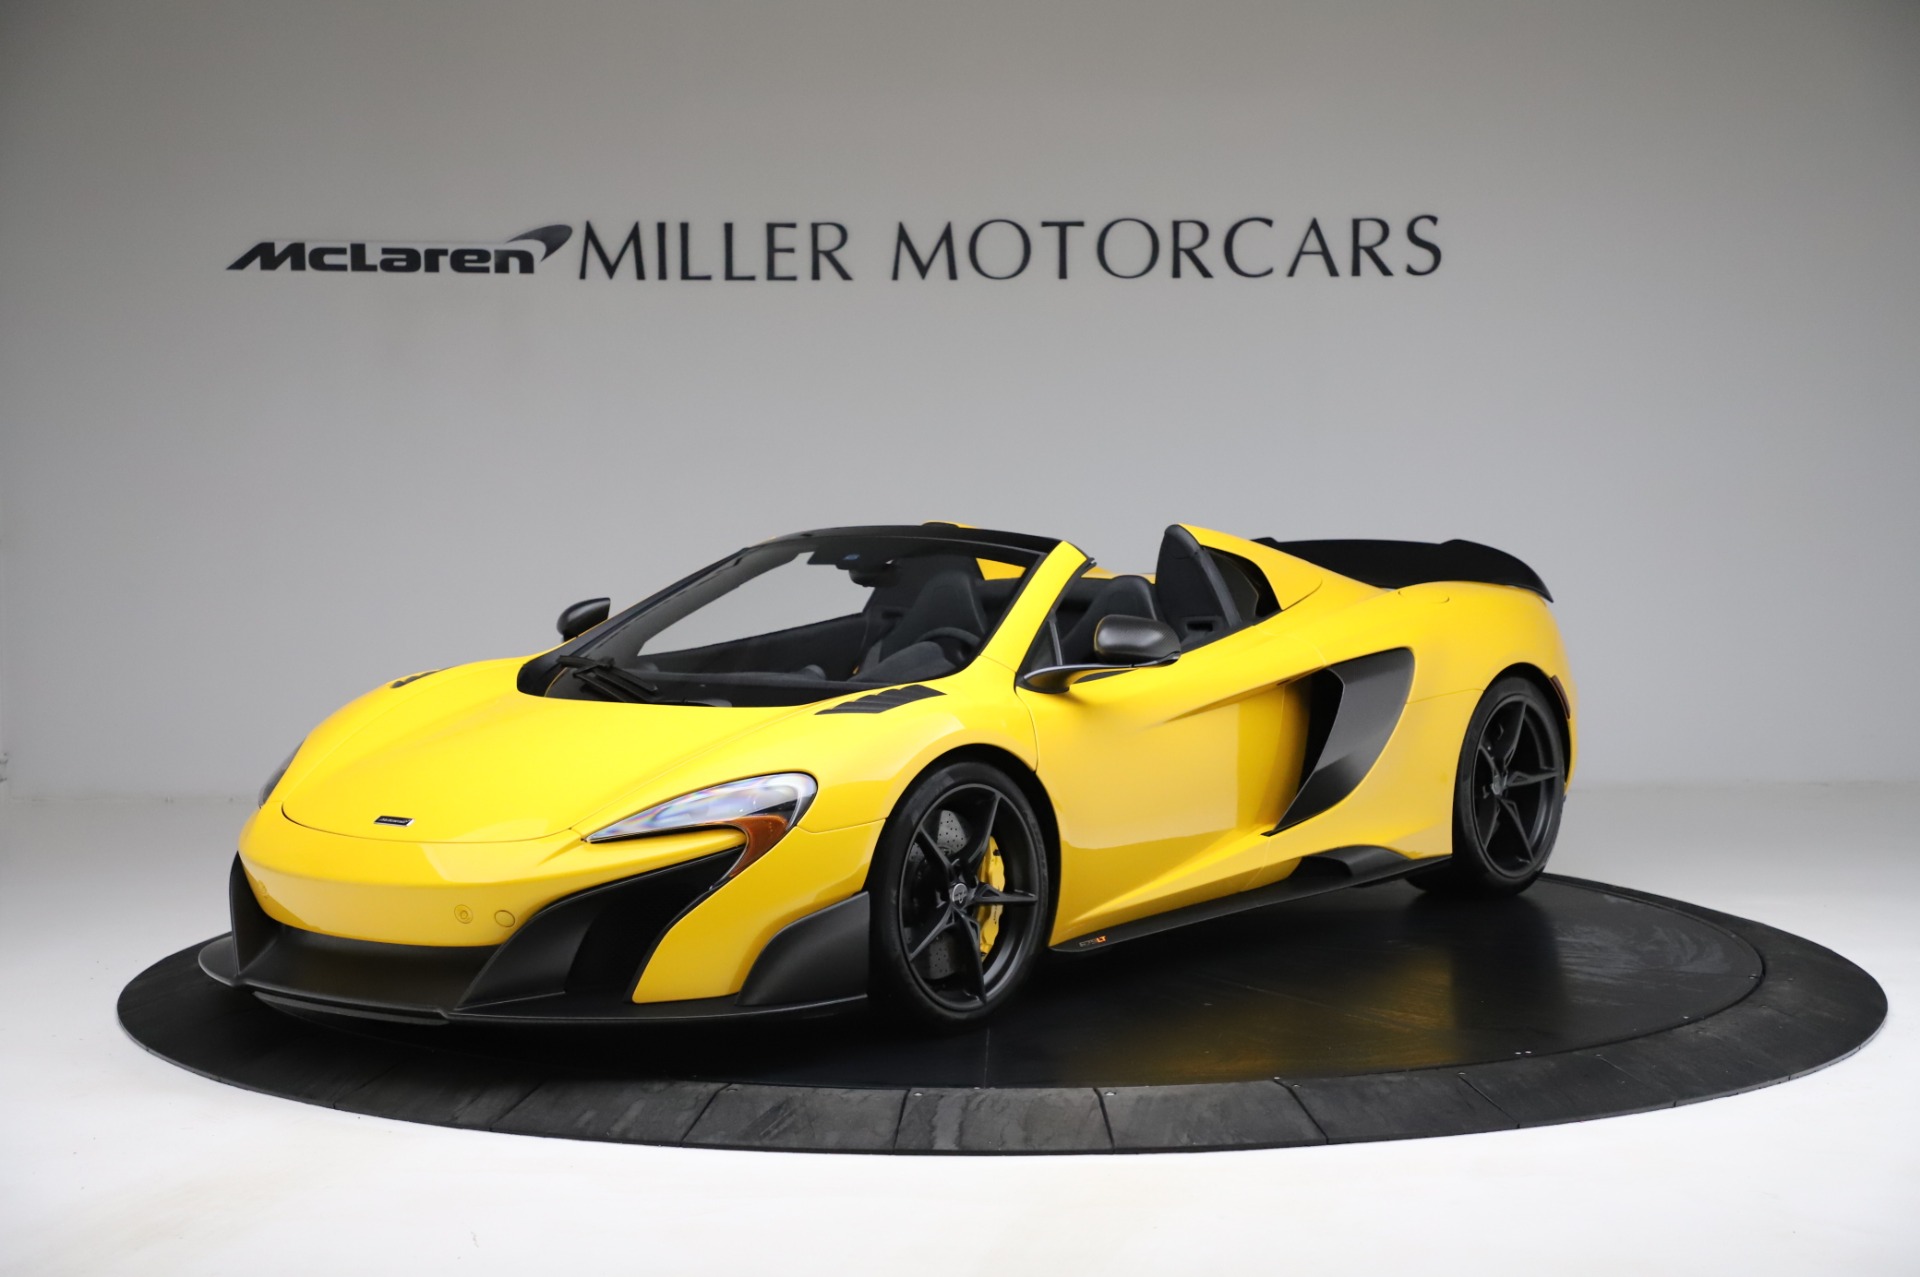 Used 2016 McLaren 675LT Spider for sale Sold at Bugatti of Greenwich in Greenwich CT 06830 1